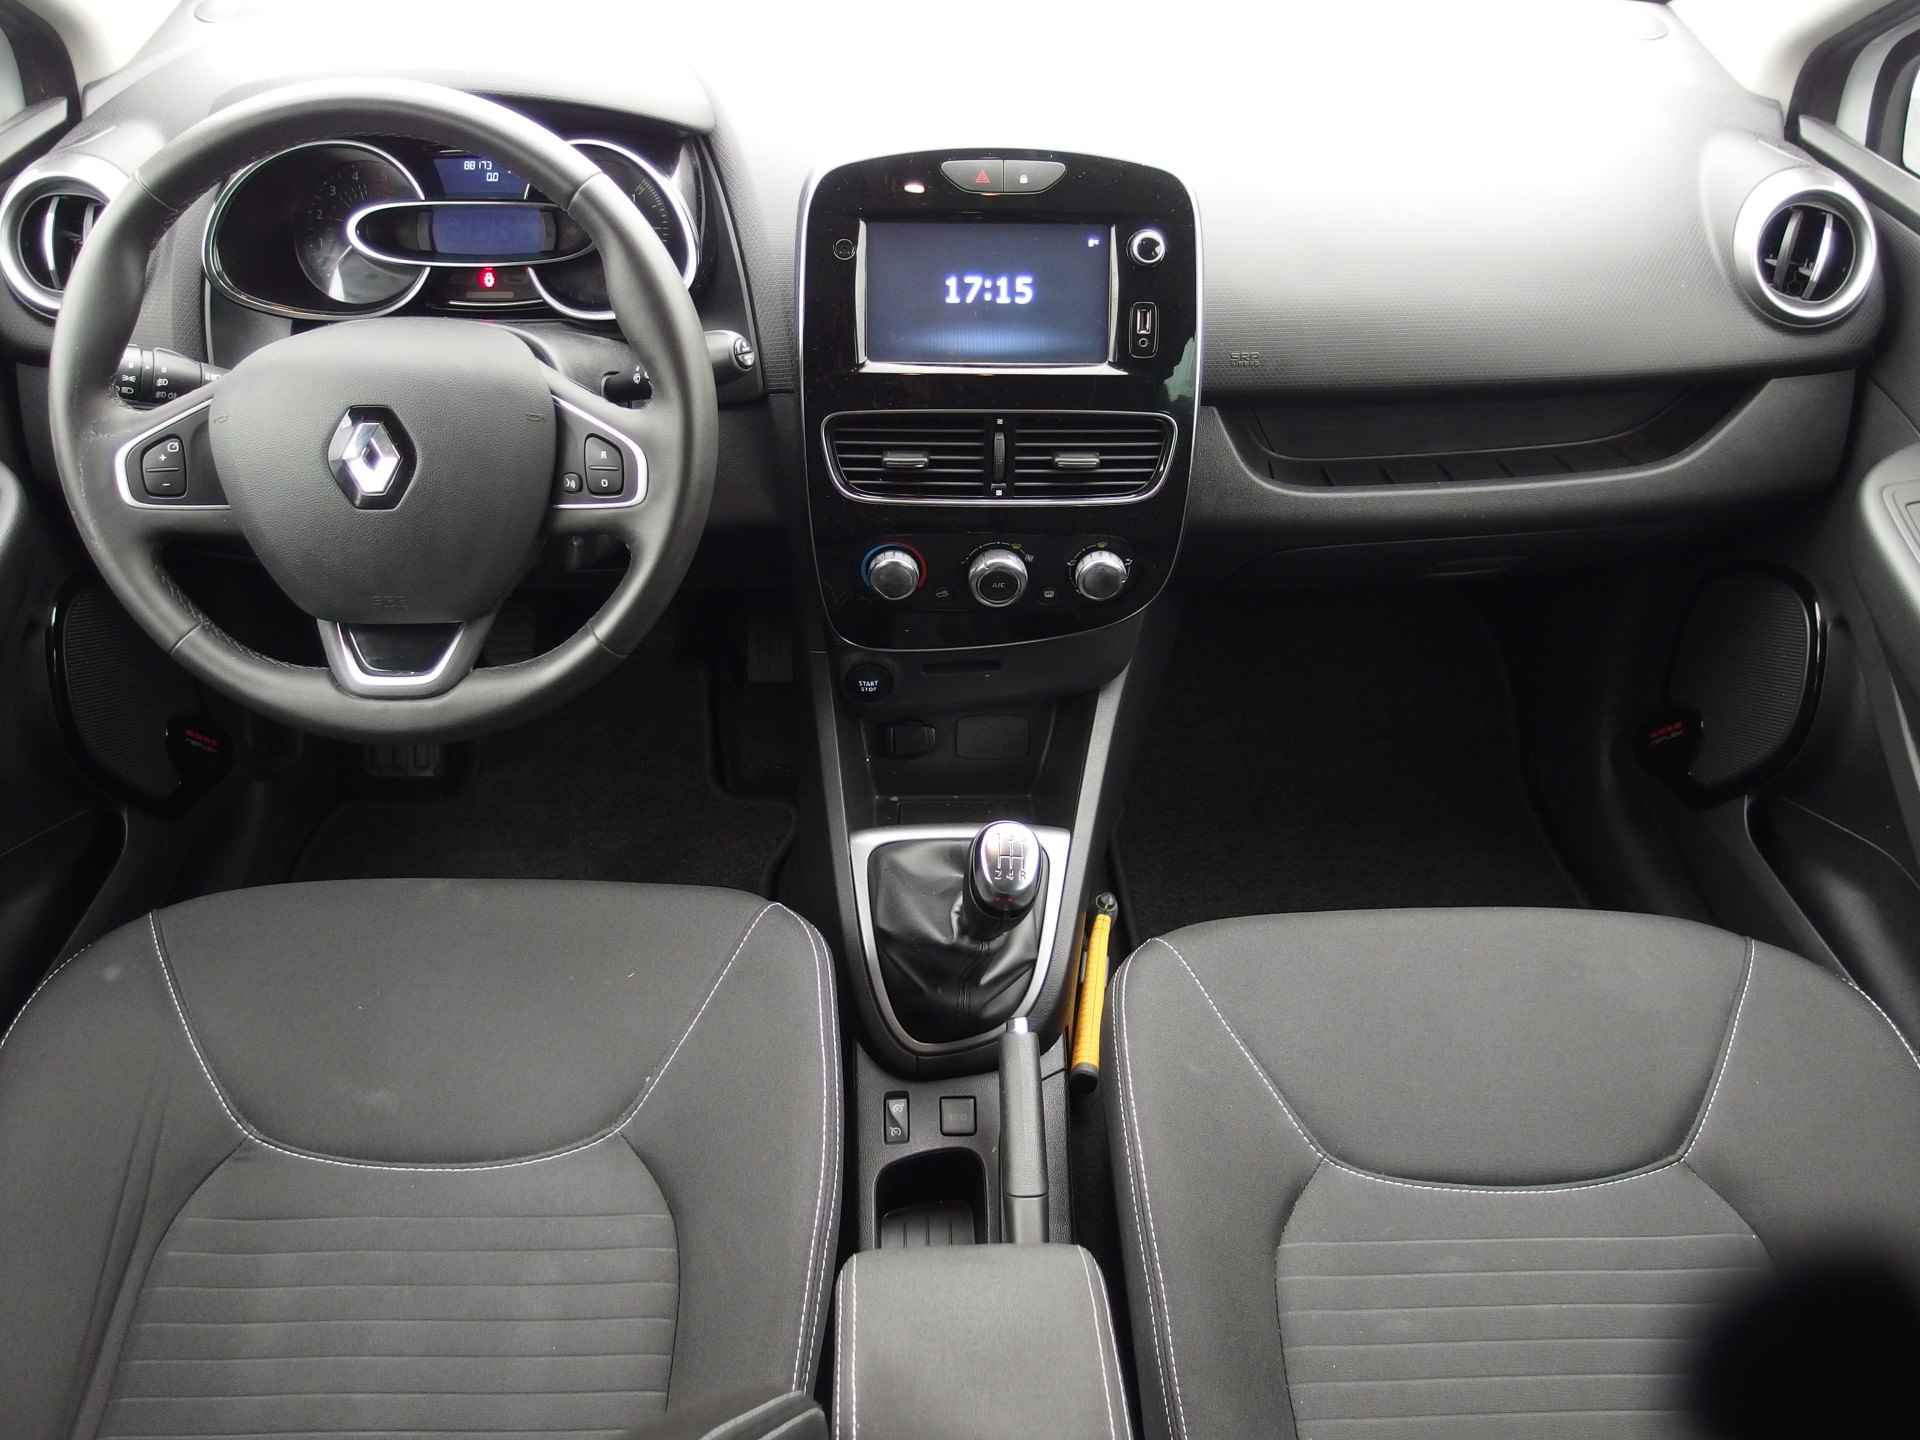 Renault Clio 1.5 dCi Ecoleader Limited NAVI / PDC / DAB+ / AIRCO / BLUETOOTH / CRUISE - 8/34